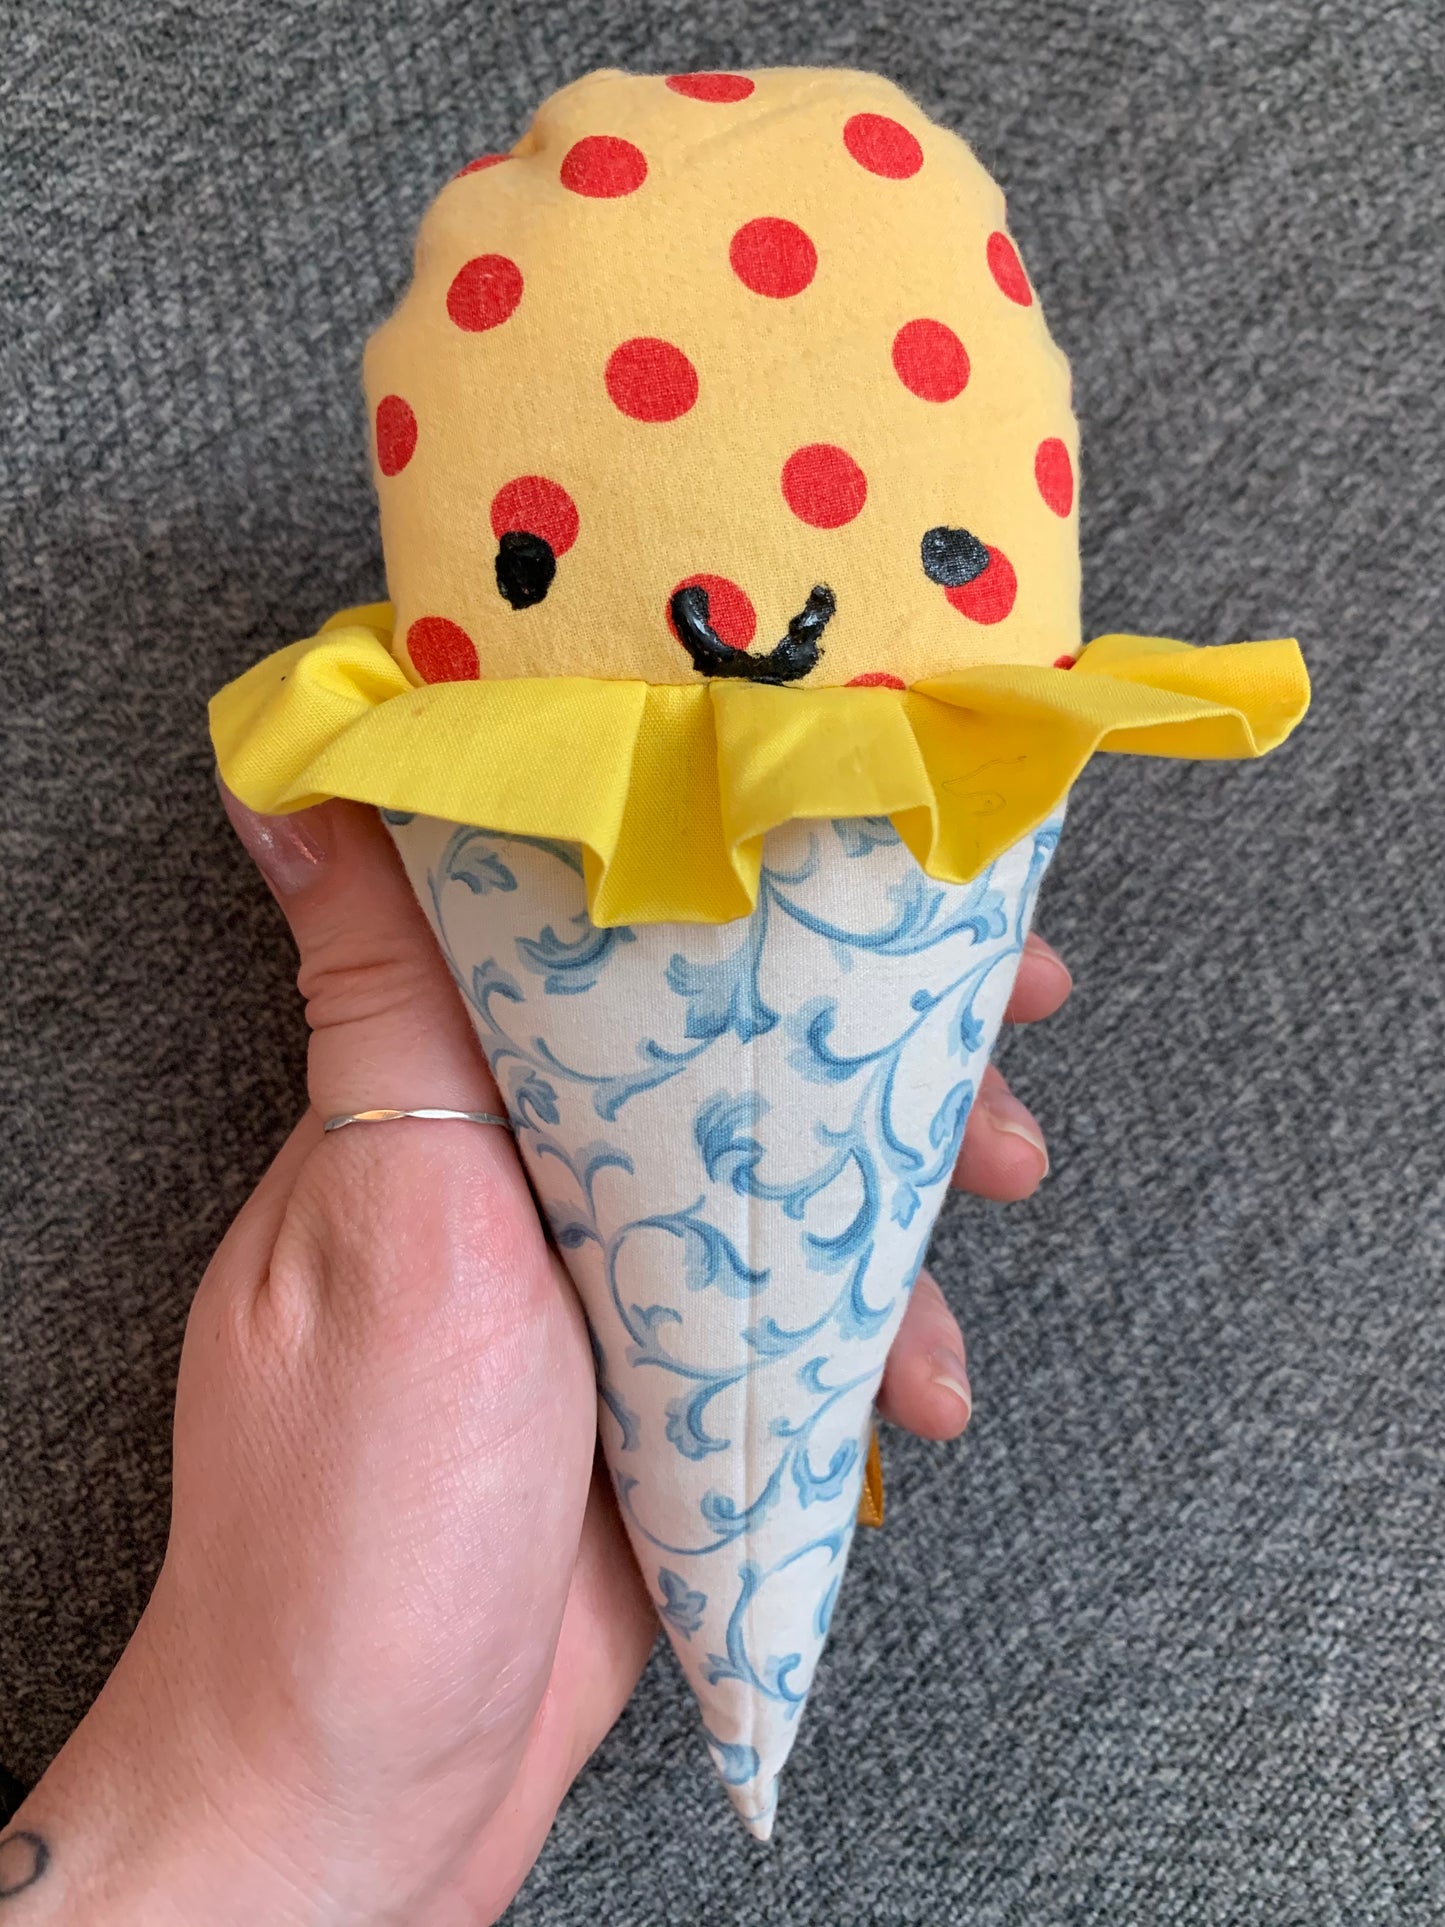 a yellow and red polkadot ice cream cone with light blue filigree cone, held up against a grey background, hand for scale